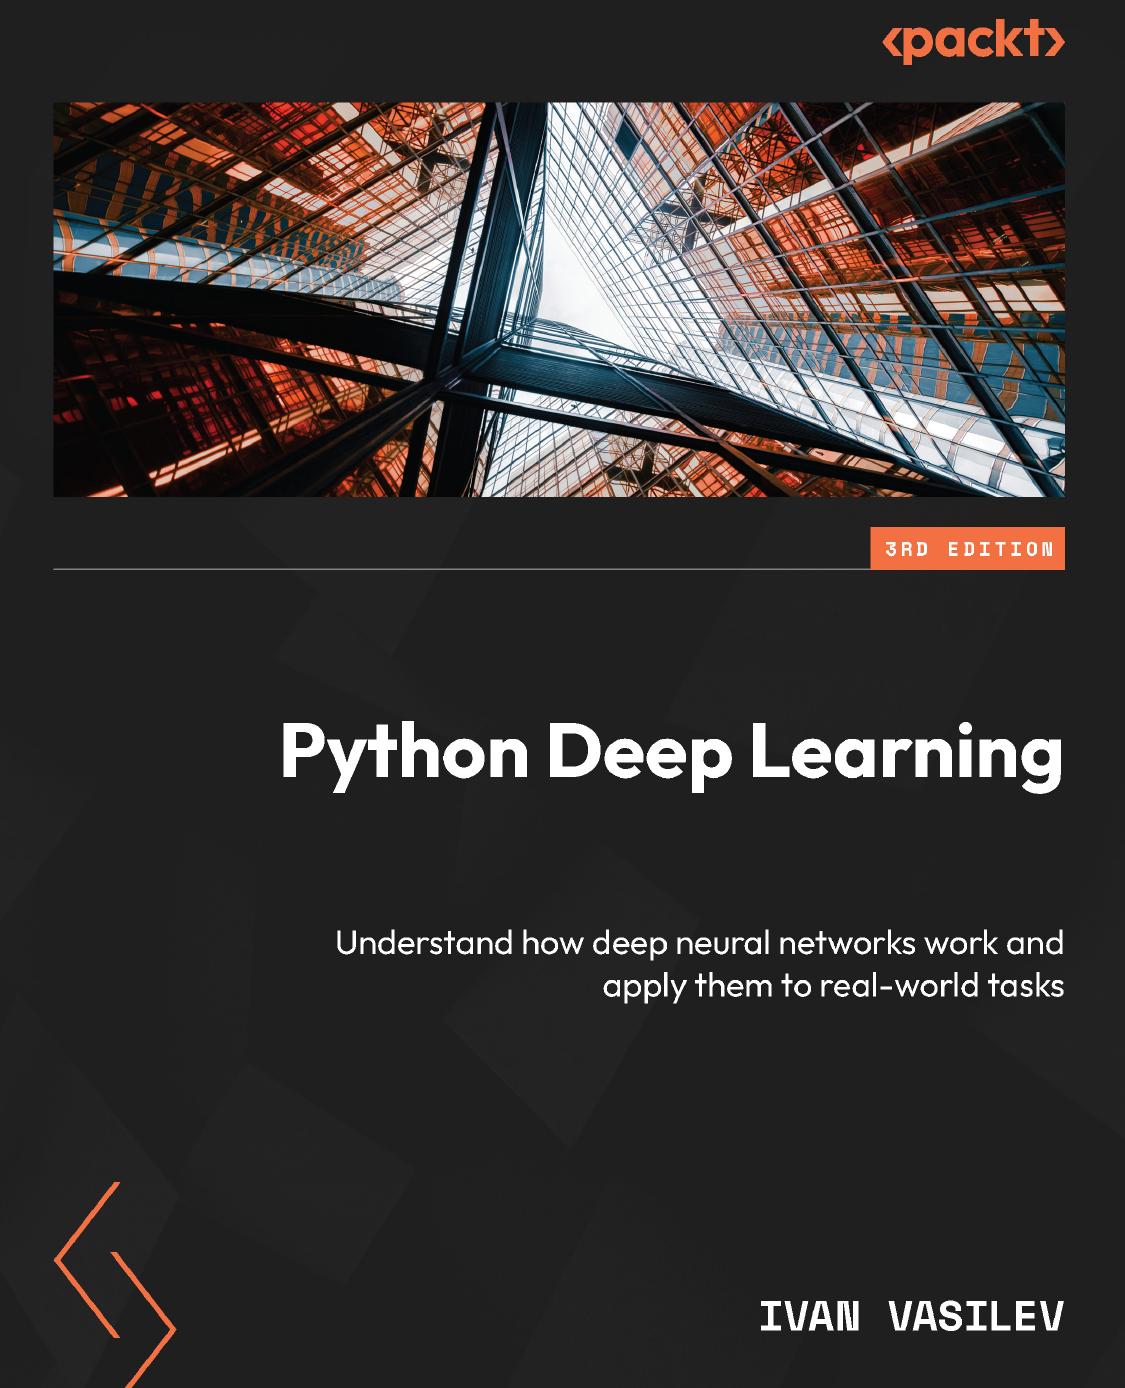 Python Deep Learning - Third Edition: Understand How Deep Neural Networks Work and Apply Them to Real-World Tasks